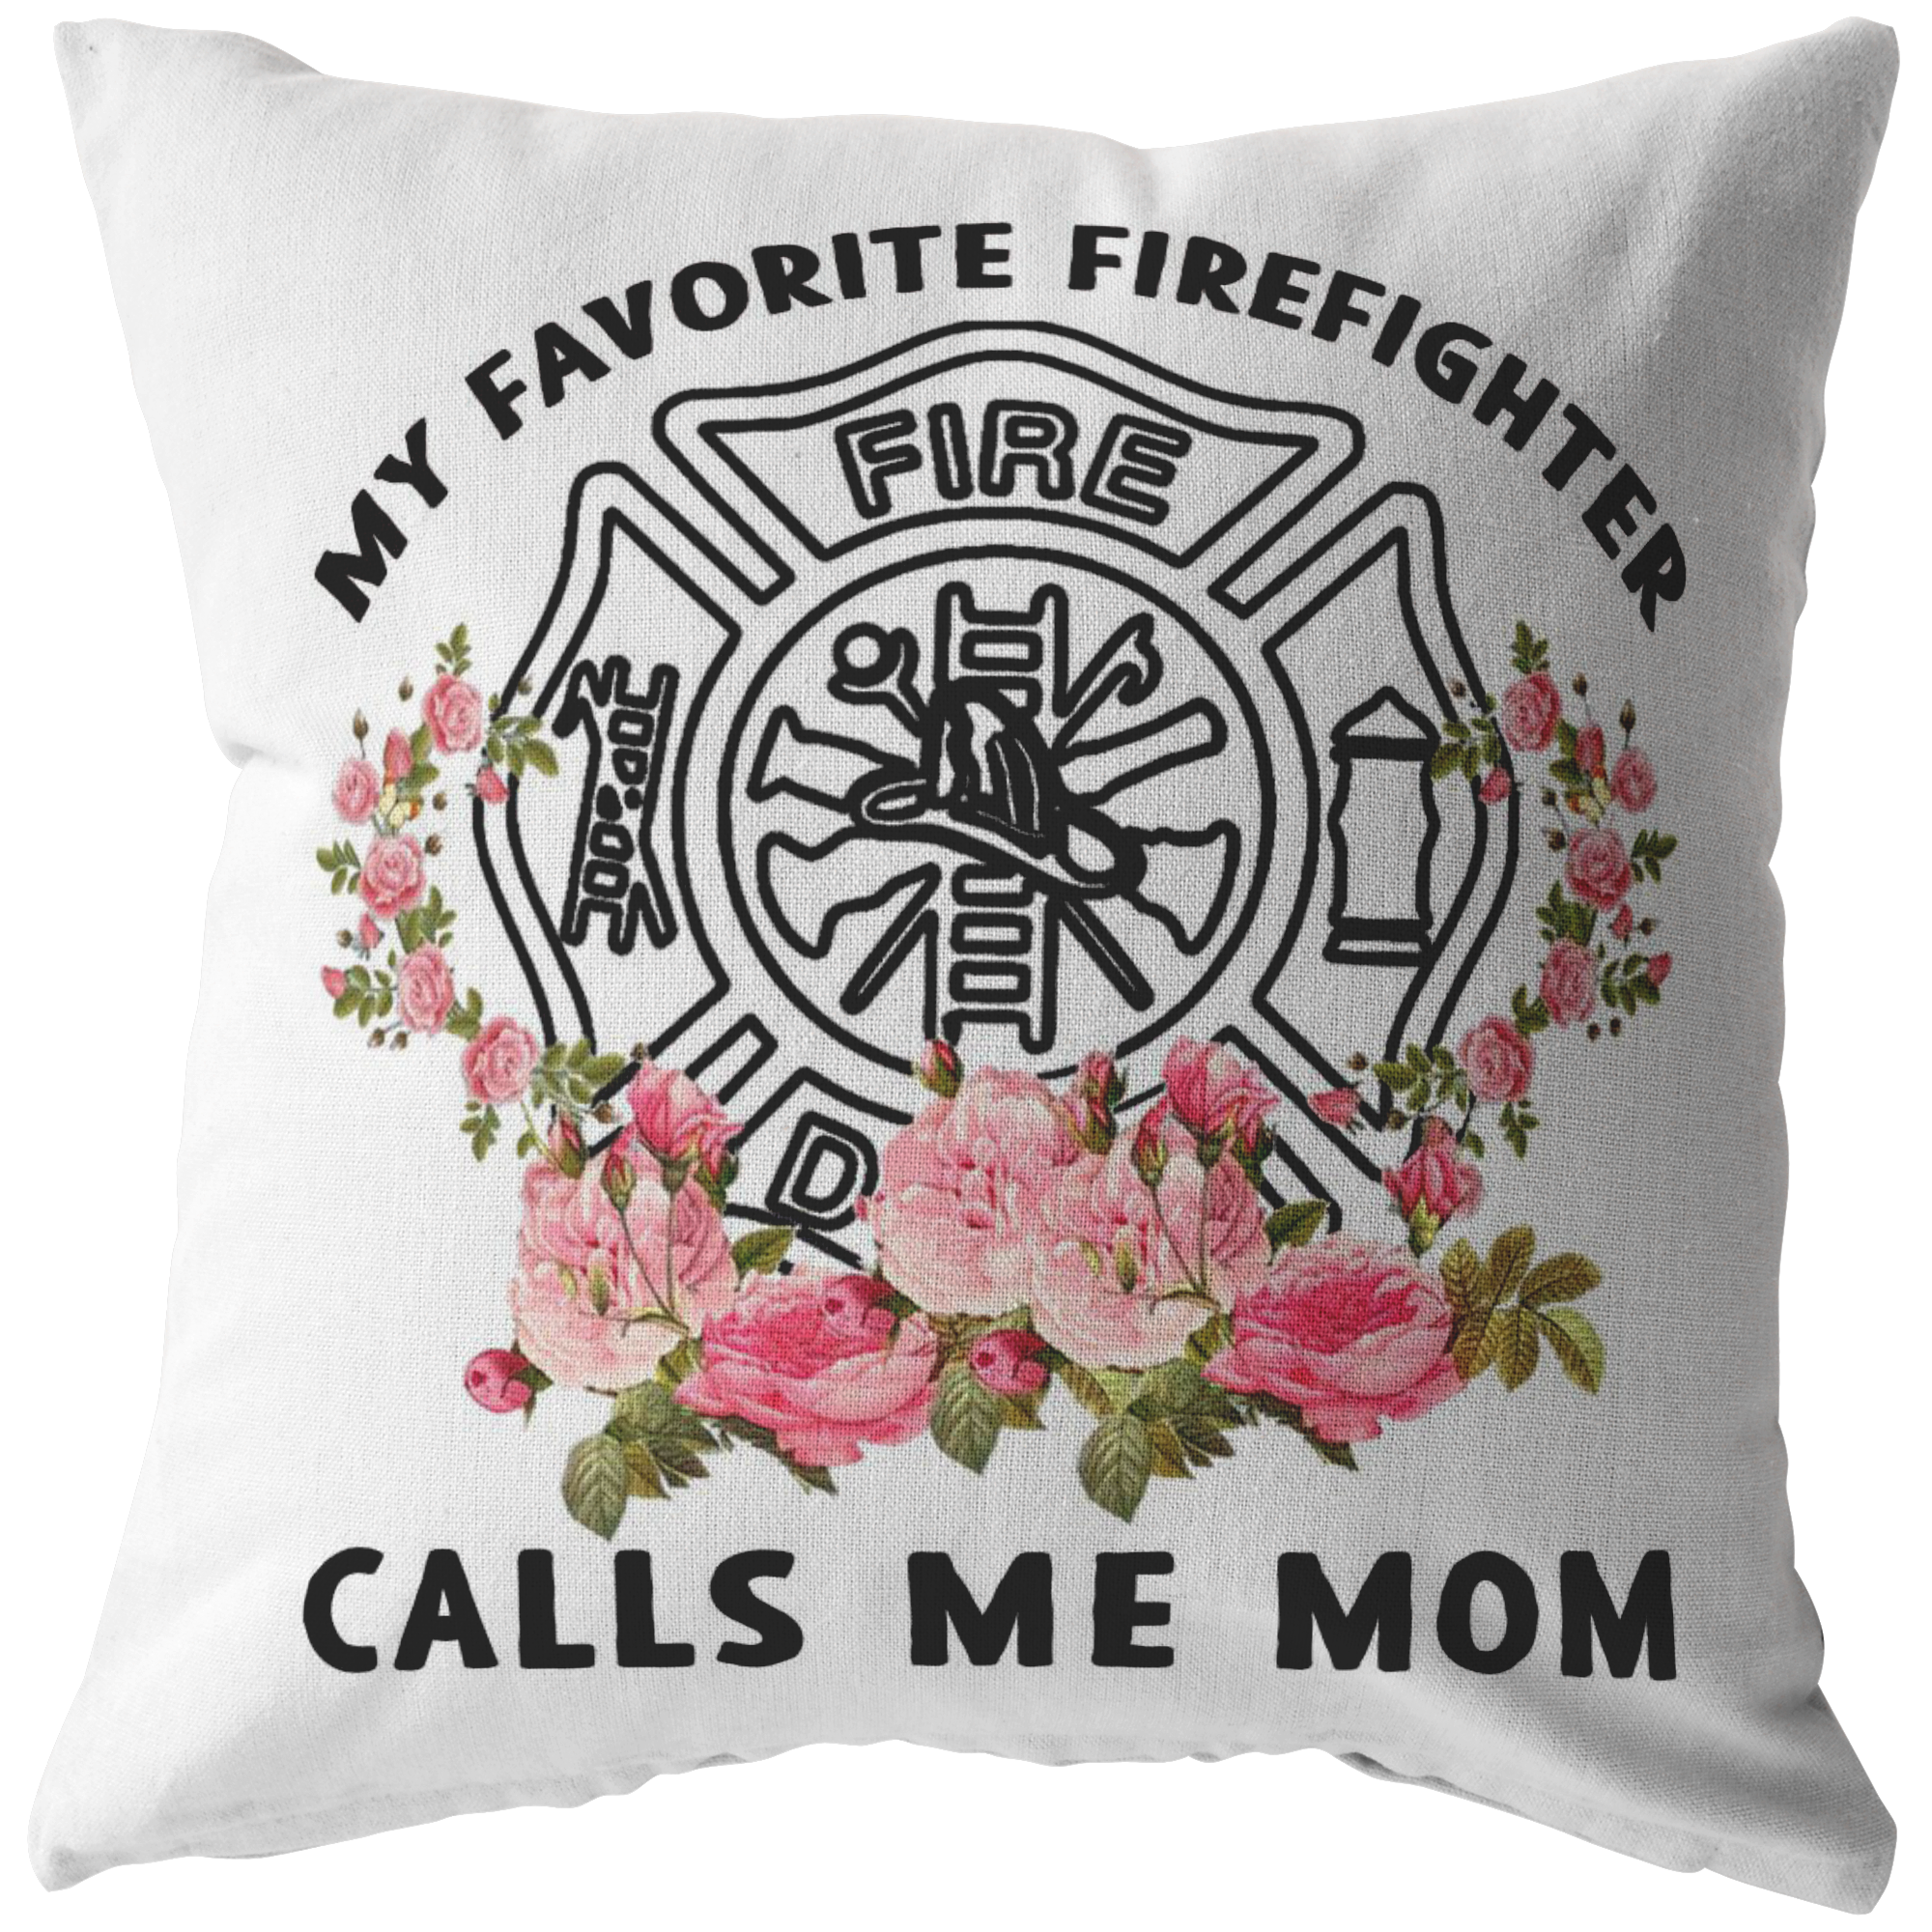 My Favorite Firefighter Calls Me Mom Pillow